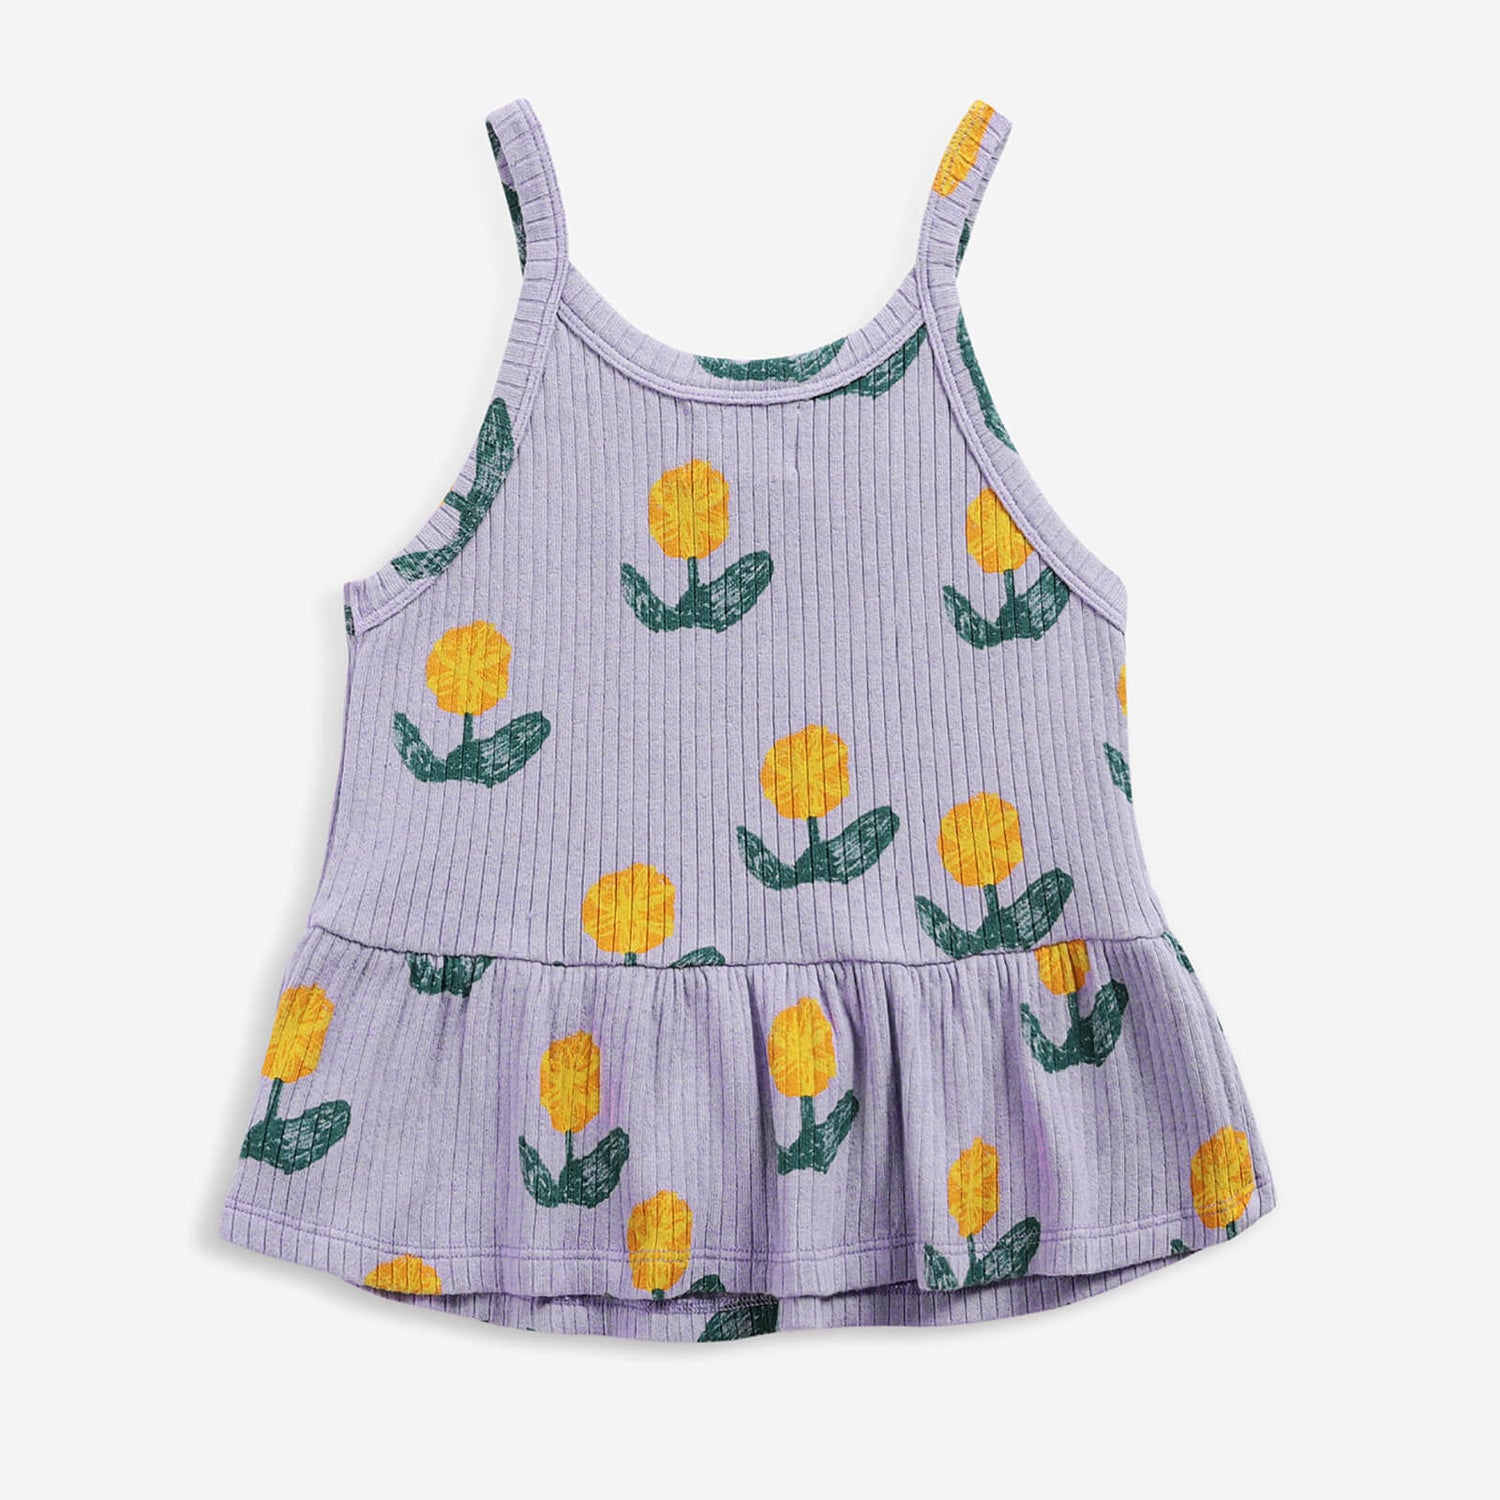 Bobo Choses Wallflowers All Over Tank Top - 2-3 years